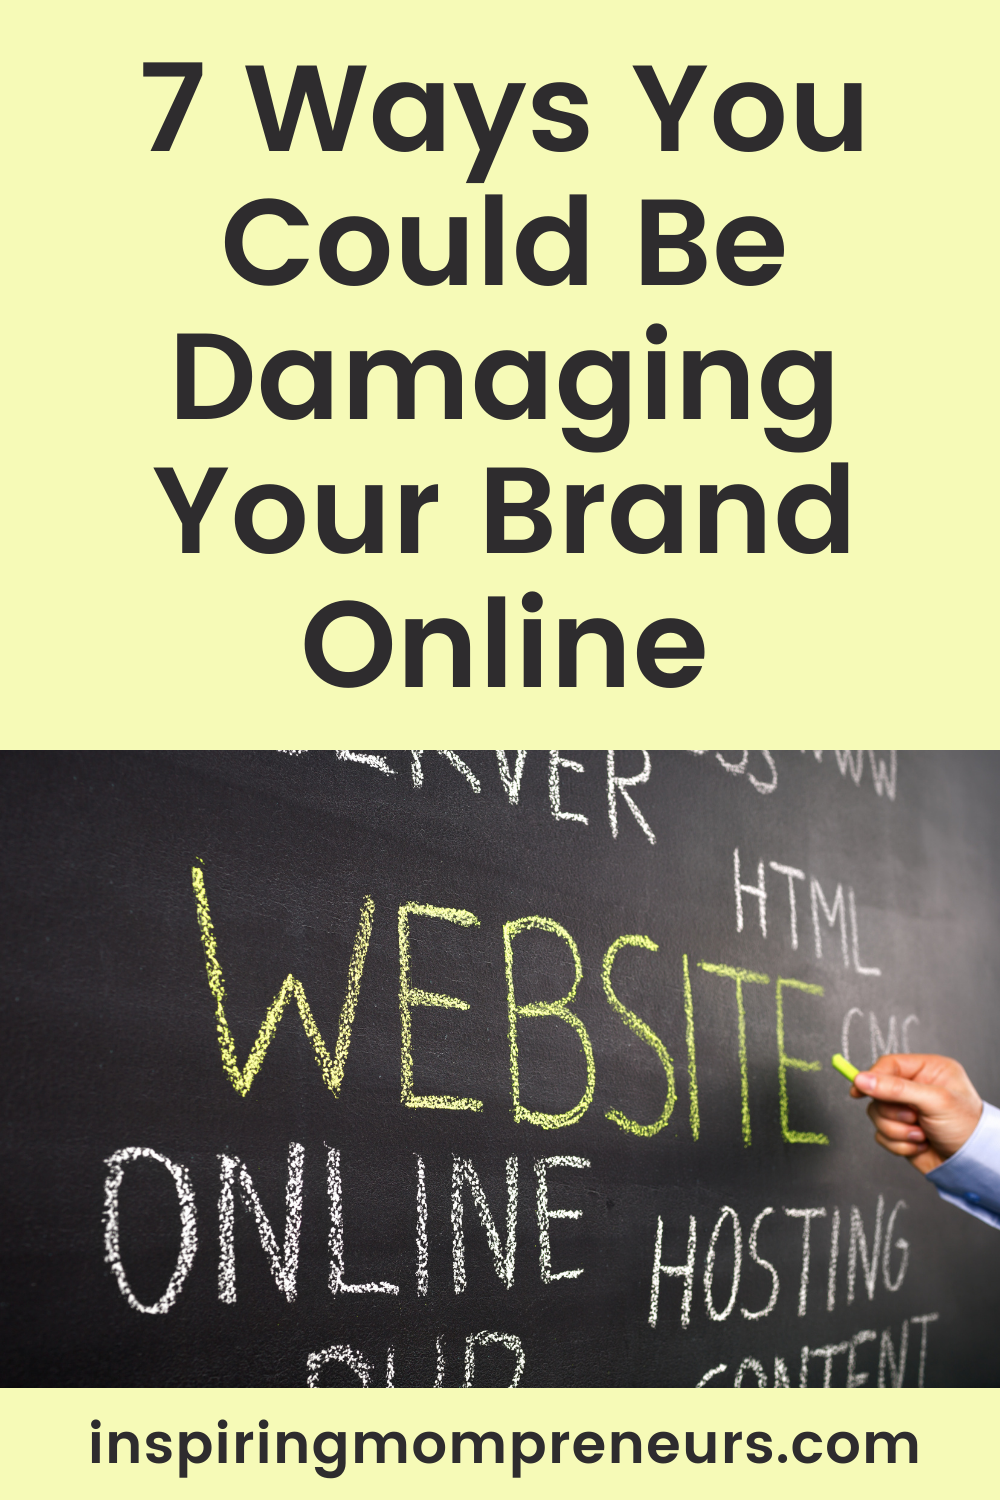 You could be damaging your brand online. There are certain common mistakes that can be hugely damaging to your brand. Here are some of those mistakes to avoid. 